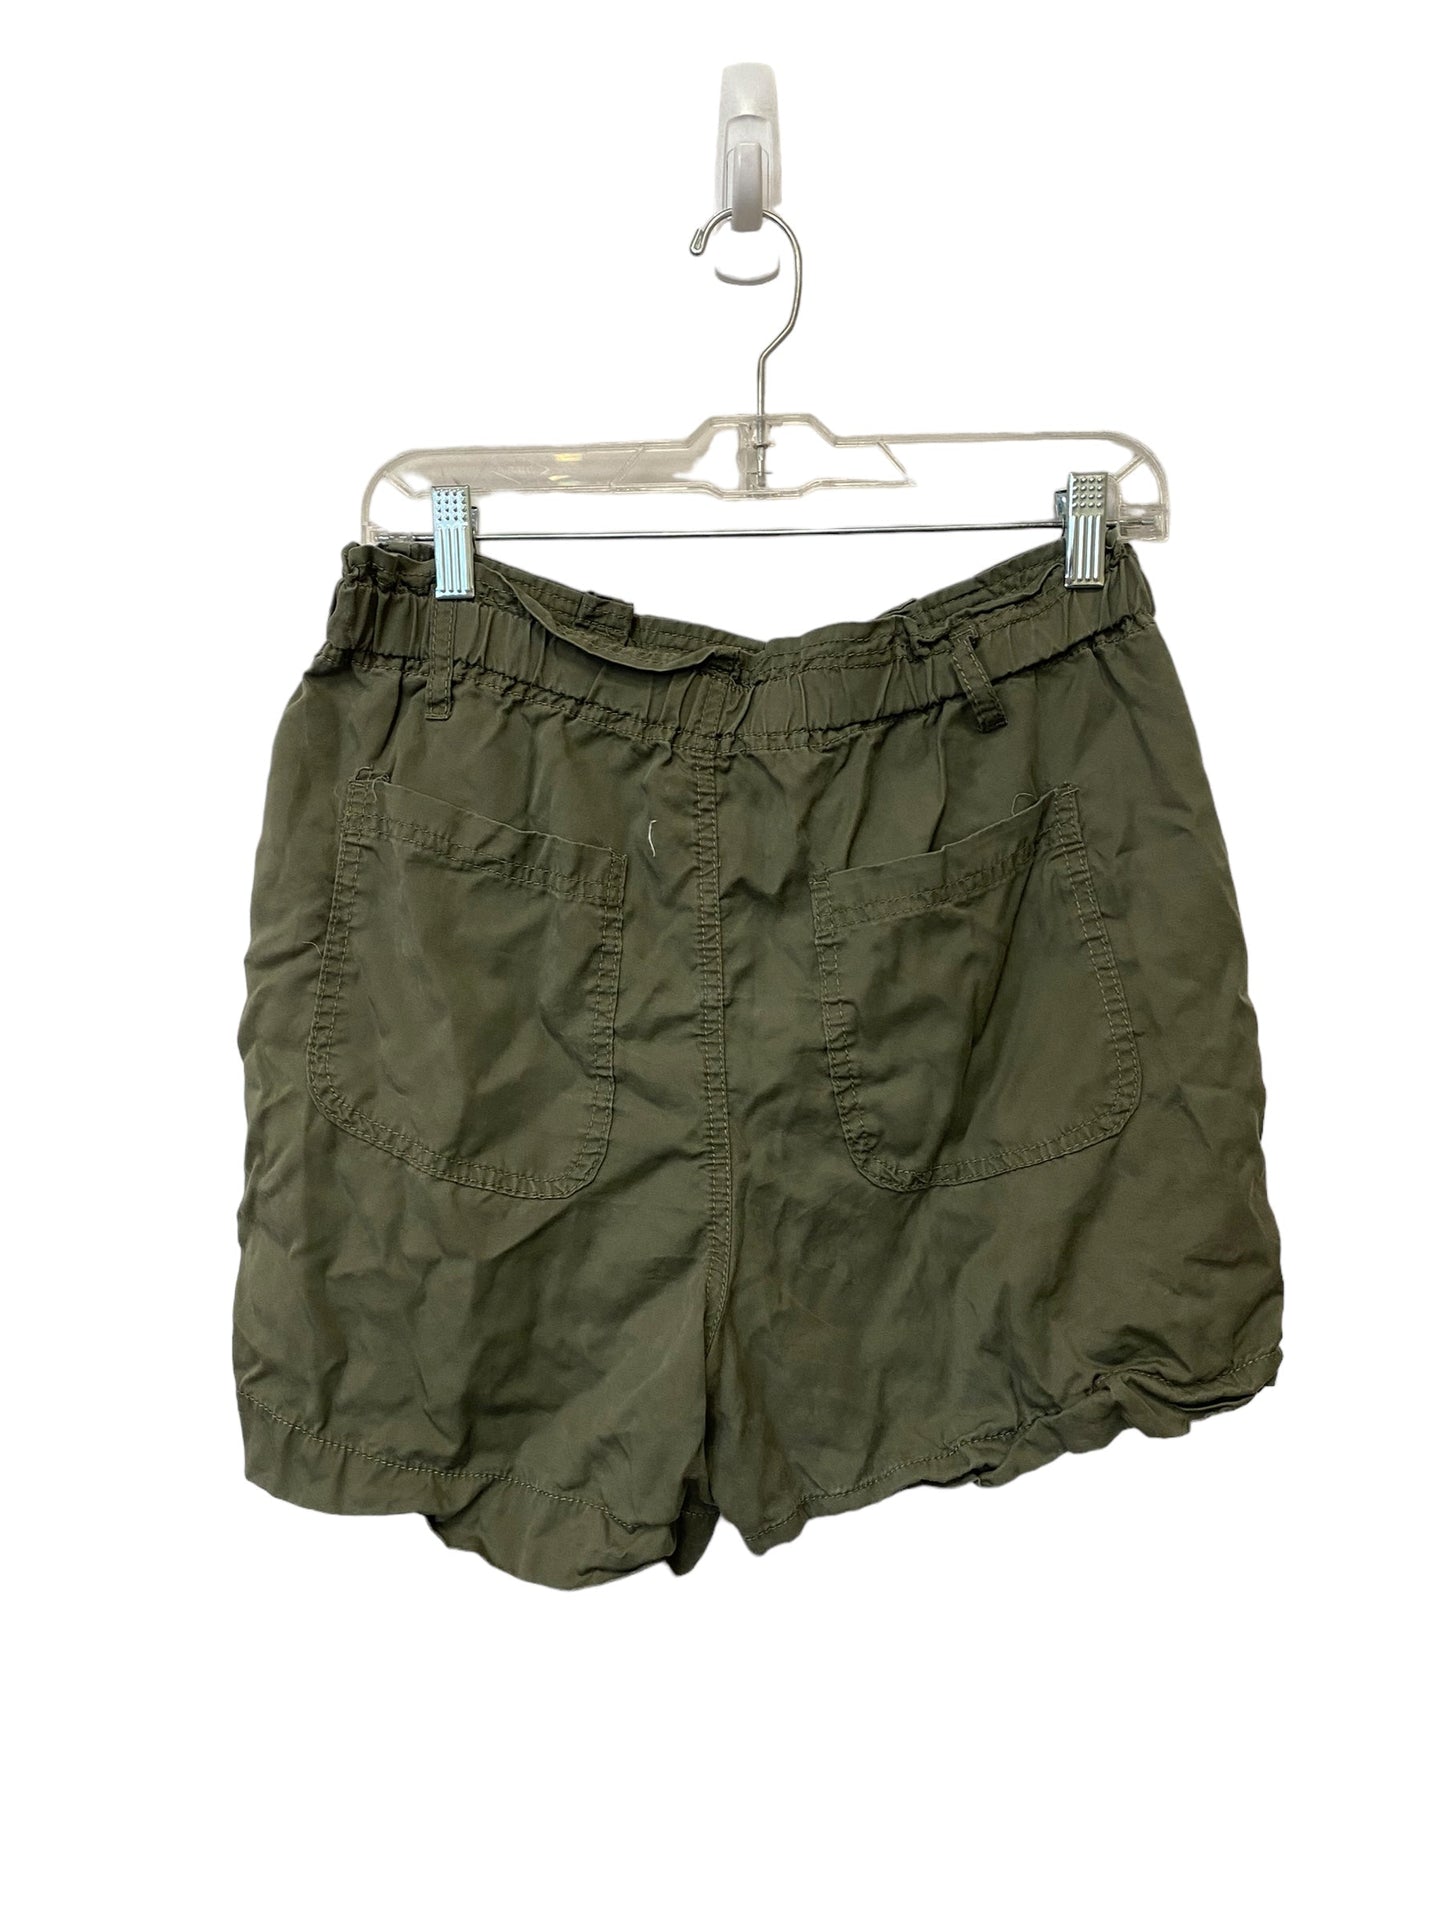 Green Shorts One 5 One, Size S